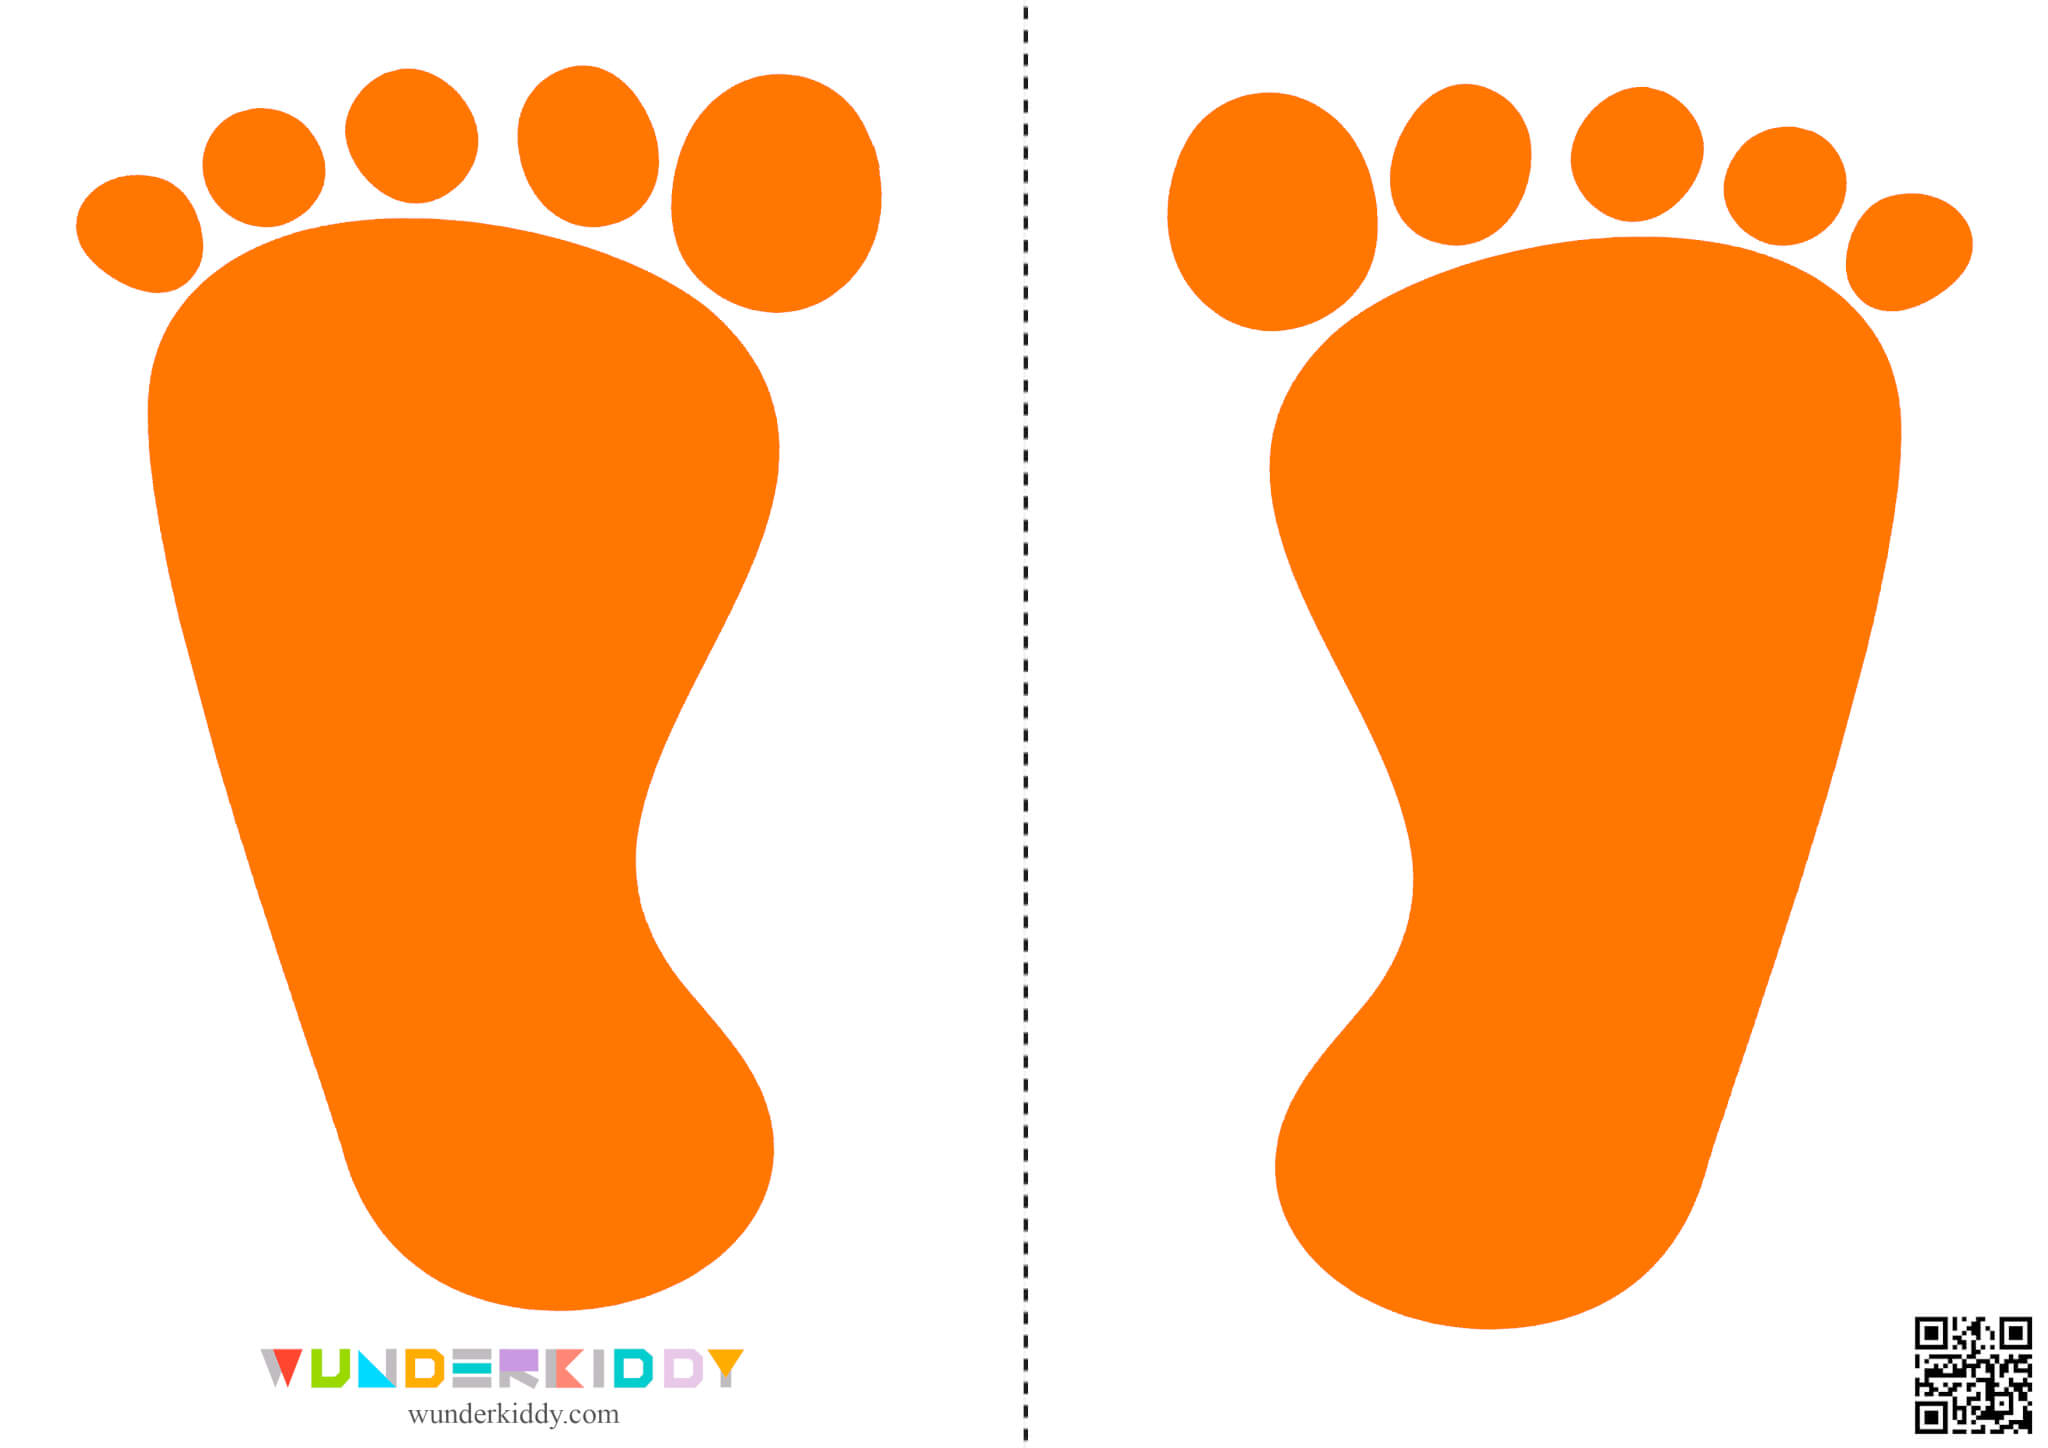 Hands and Feet Color Sensory Path - Image 19